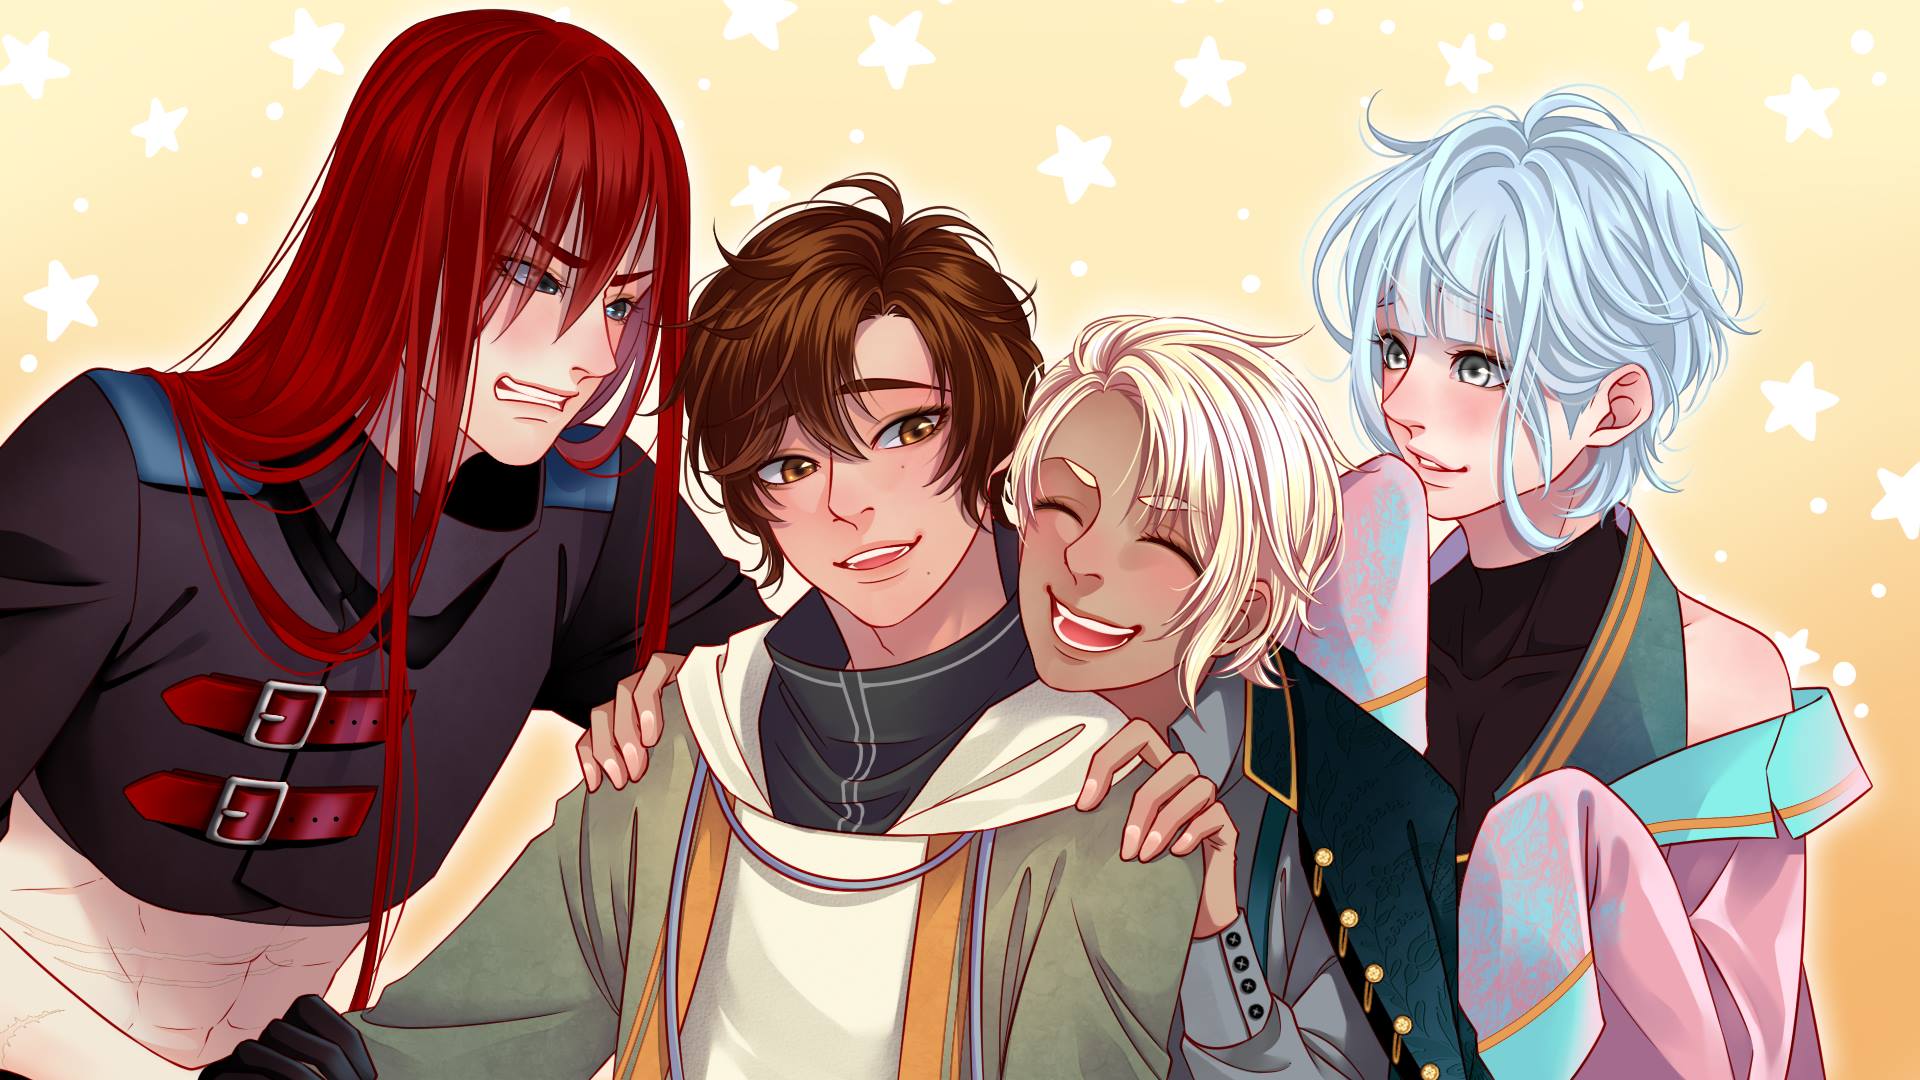 Illustrated characters, Leos with red hair looking at Raen. Cyne has his chin hooked over Raen's shoulder, and Faen is looking at all of them.